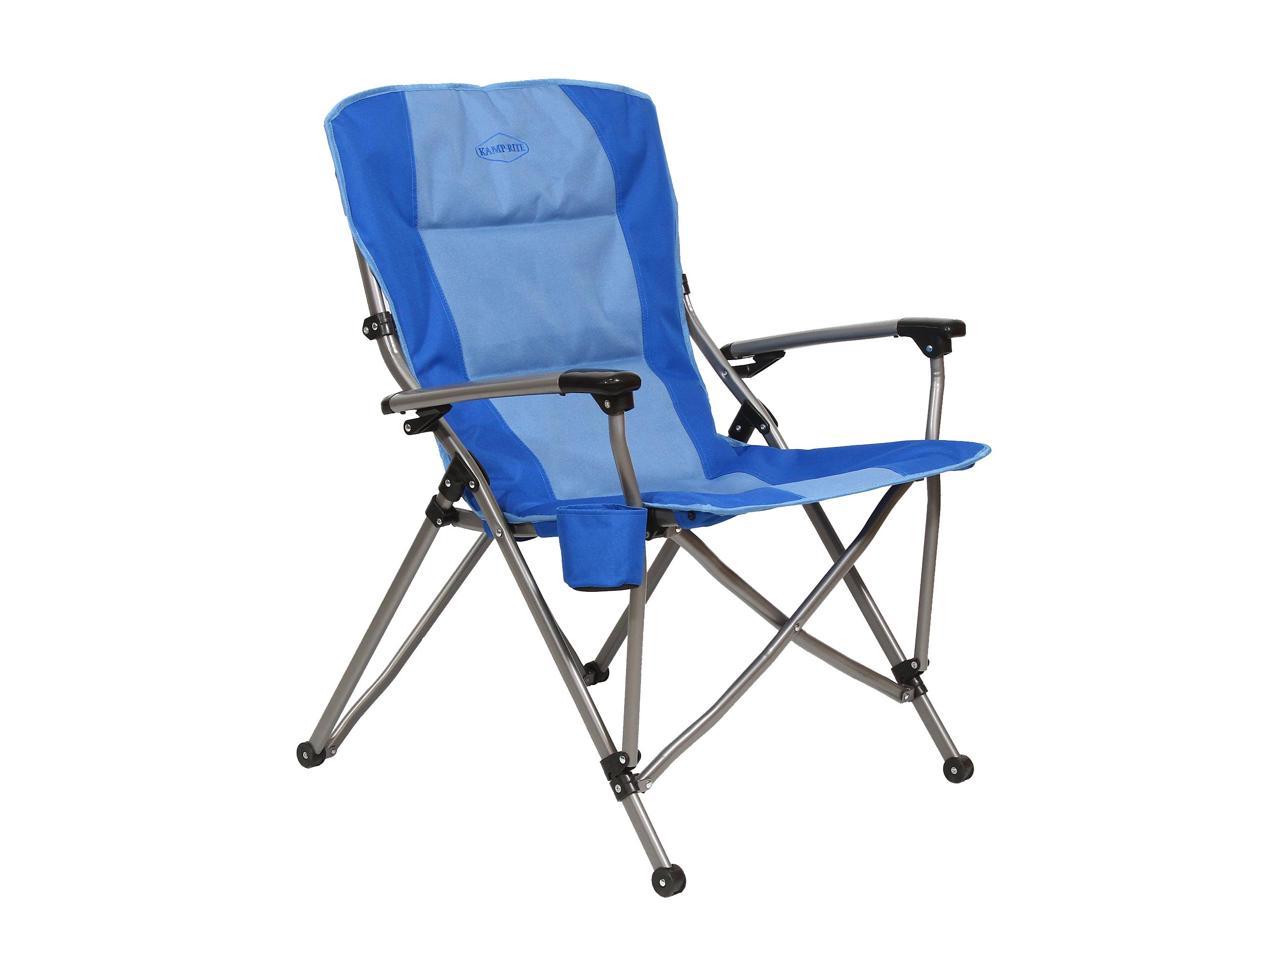 timber ridge folding chair with side table